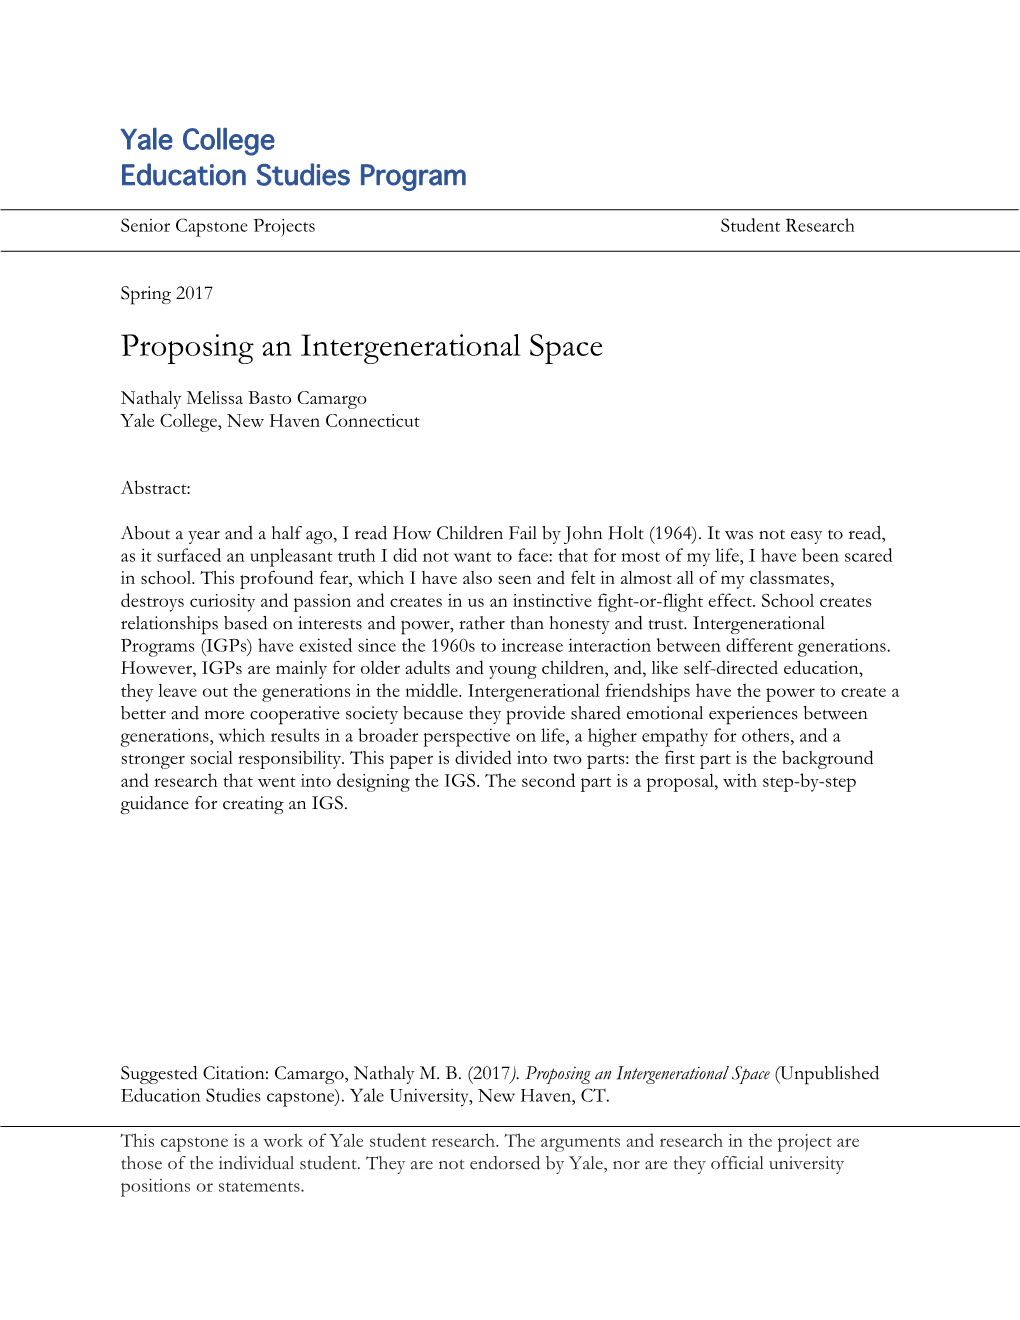 Proposing an Intergenerational Space